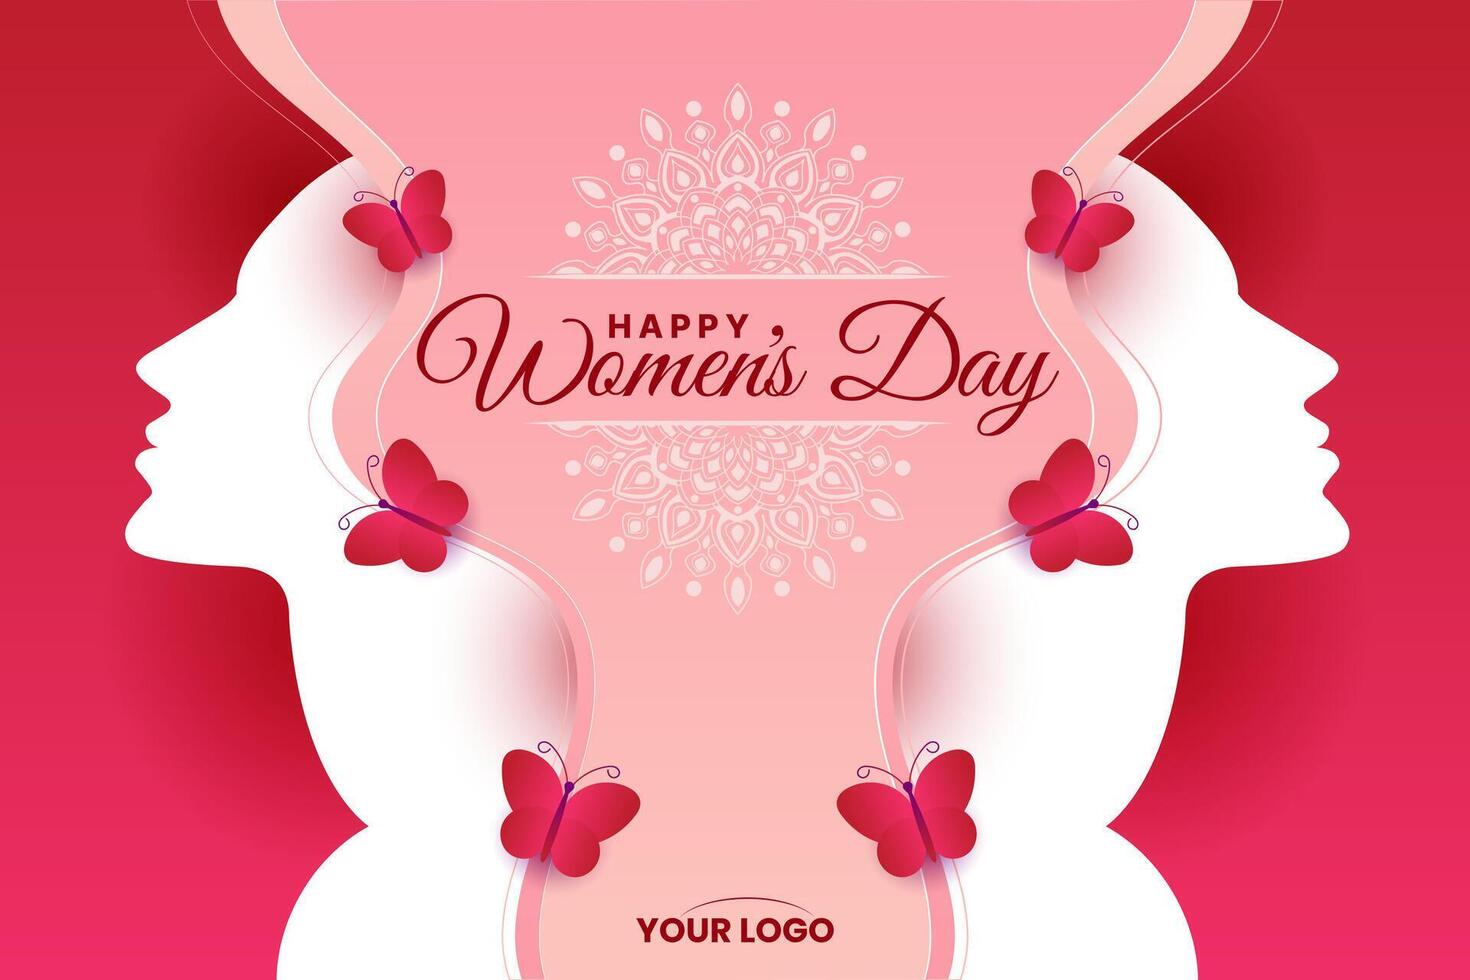 International Women's Day 8th March celebration background template with butterfly vector